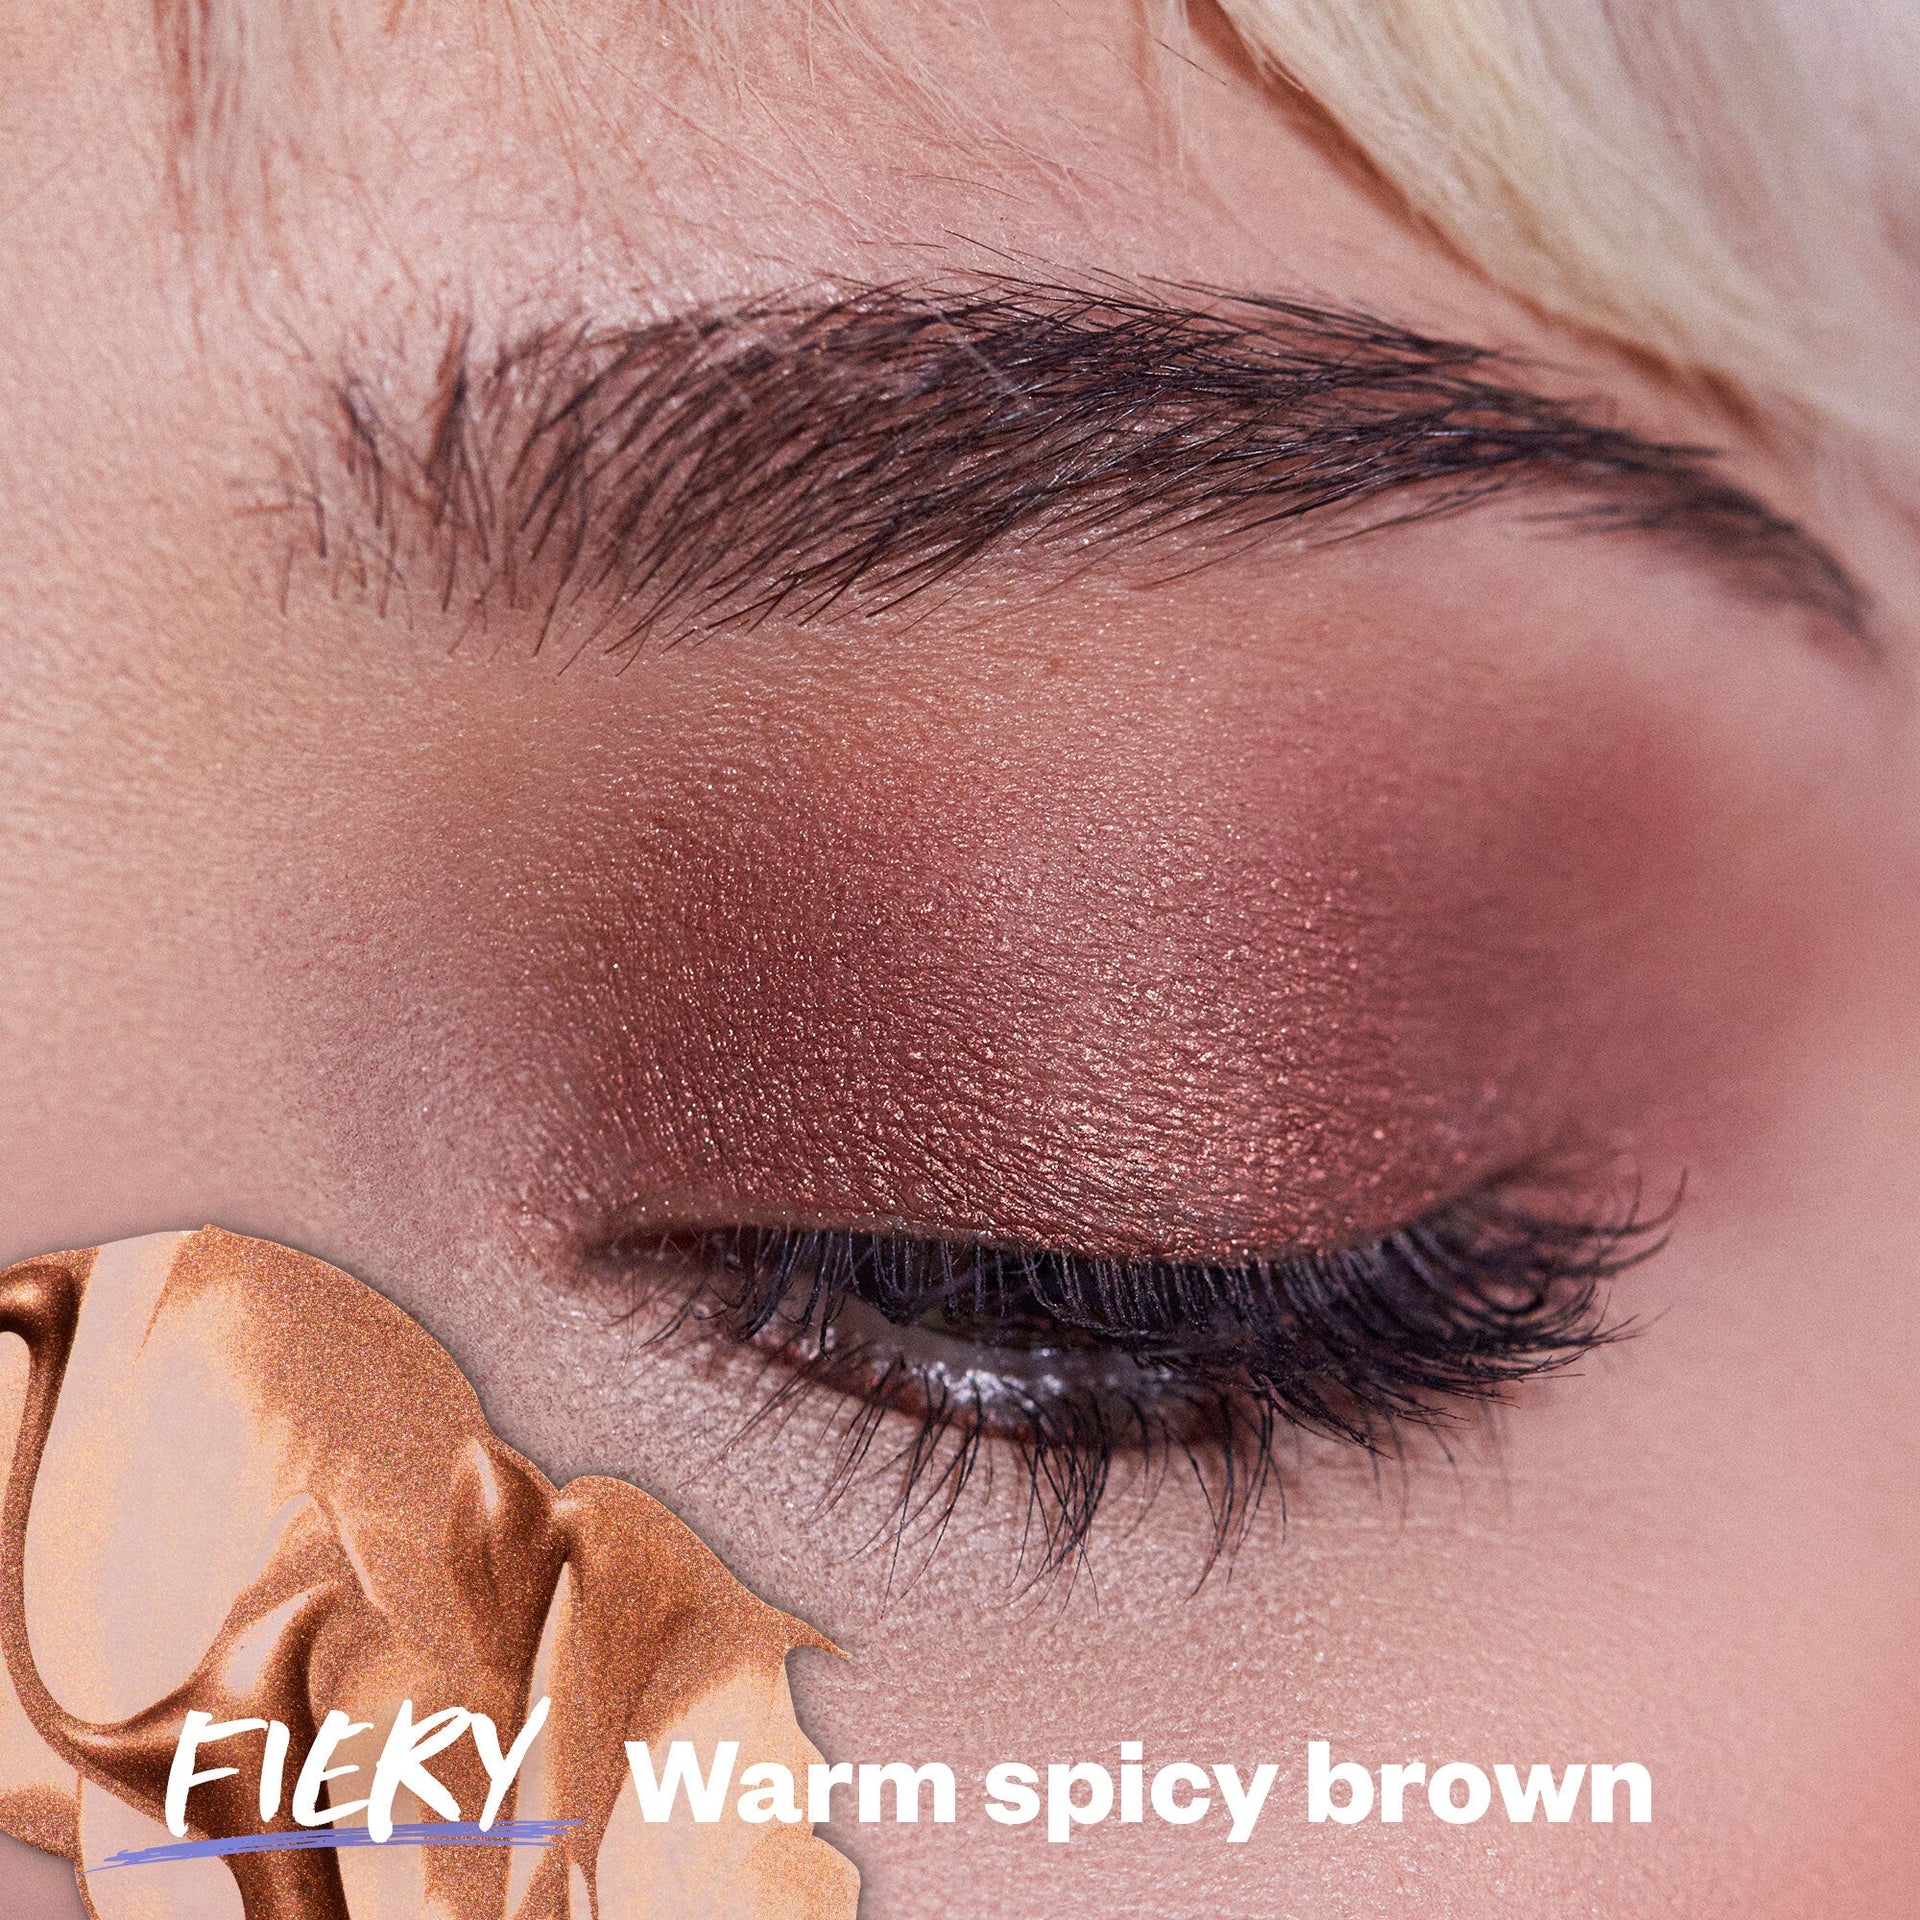 Close-up image of Kosas Eyeshadow Gel in the shade 'Fiery' when applied.